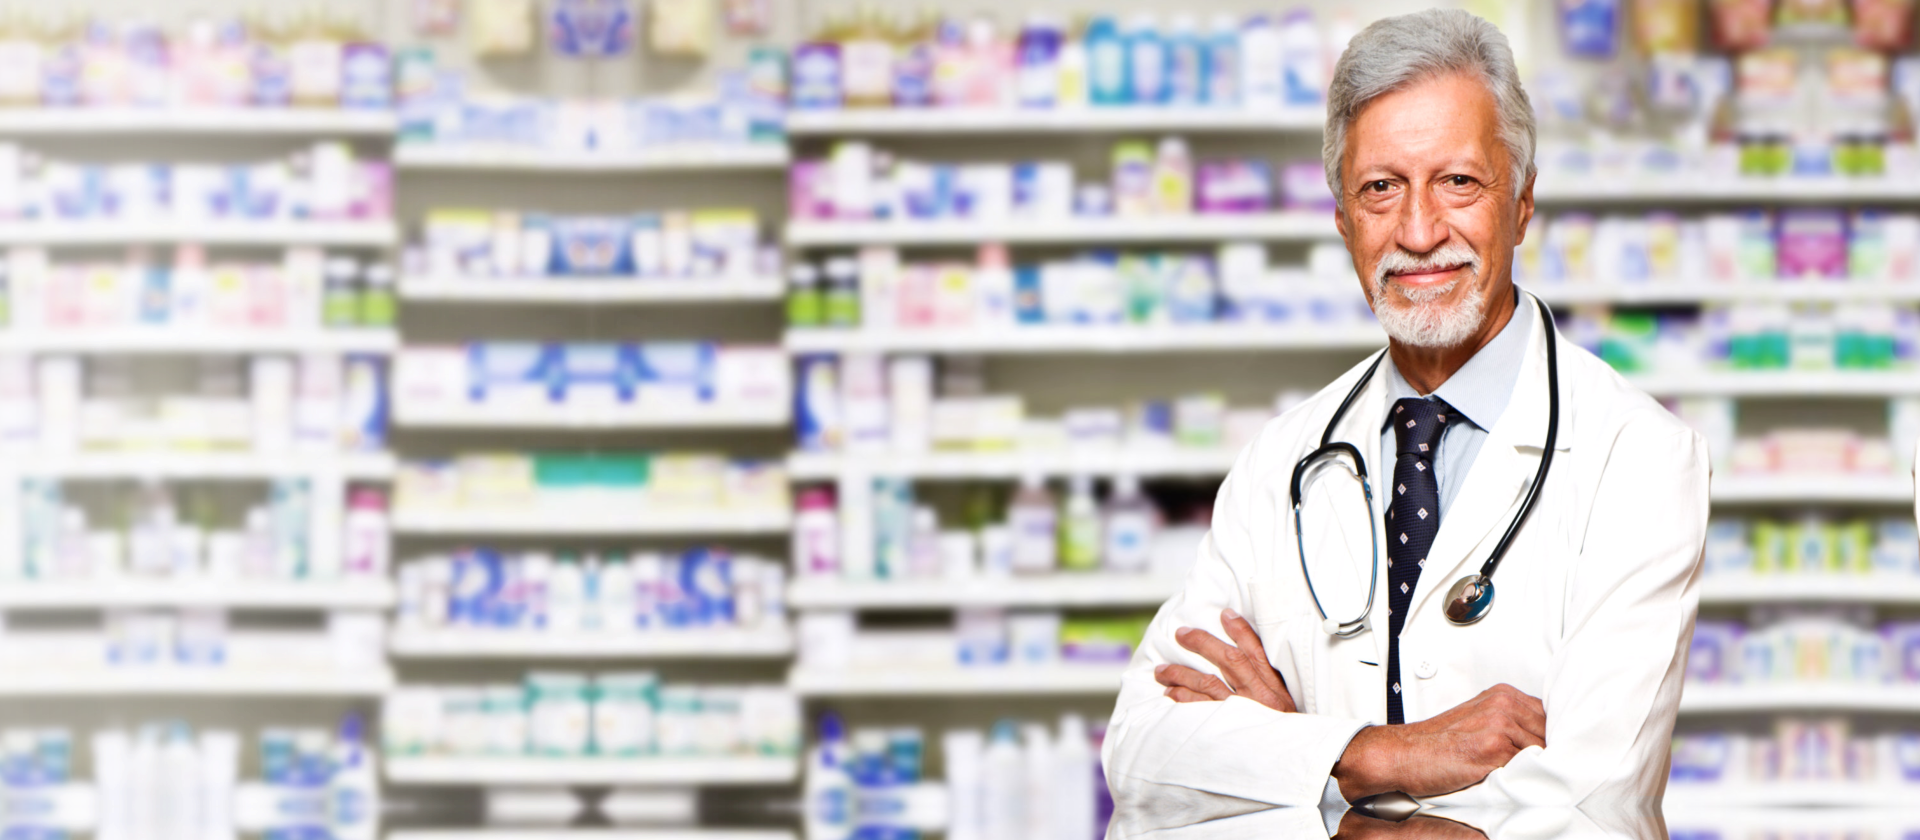 Portrait of a male pharmacist at pharmacy